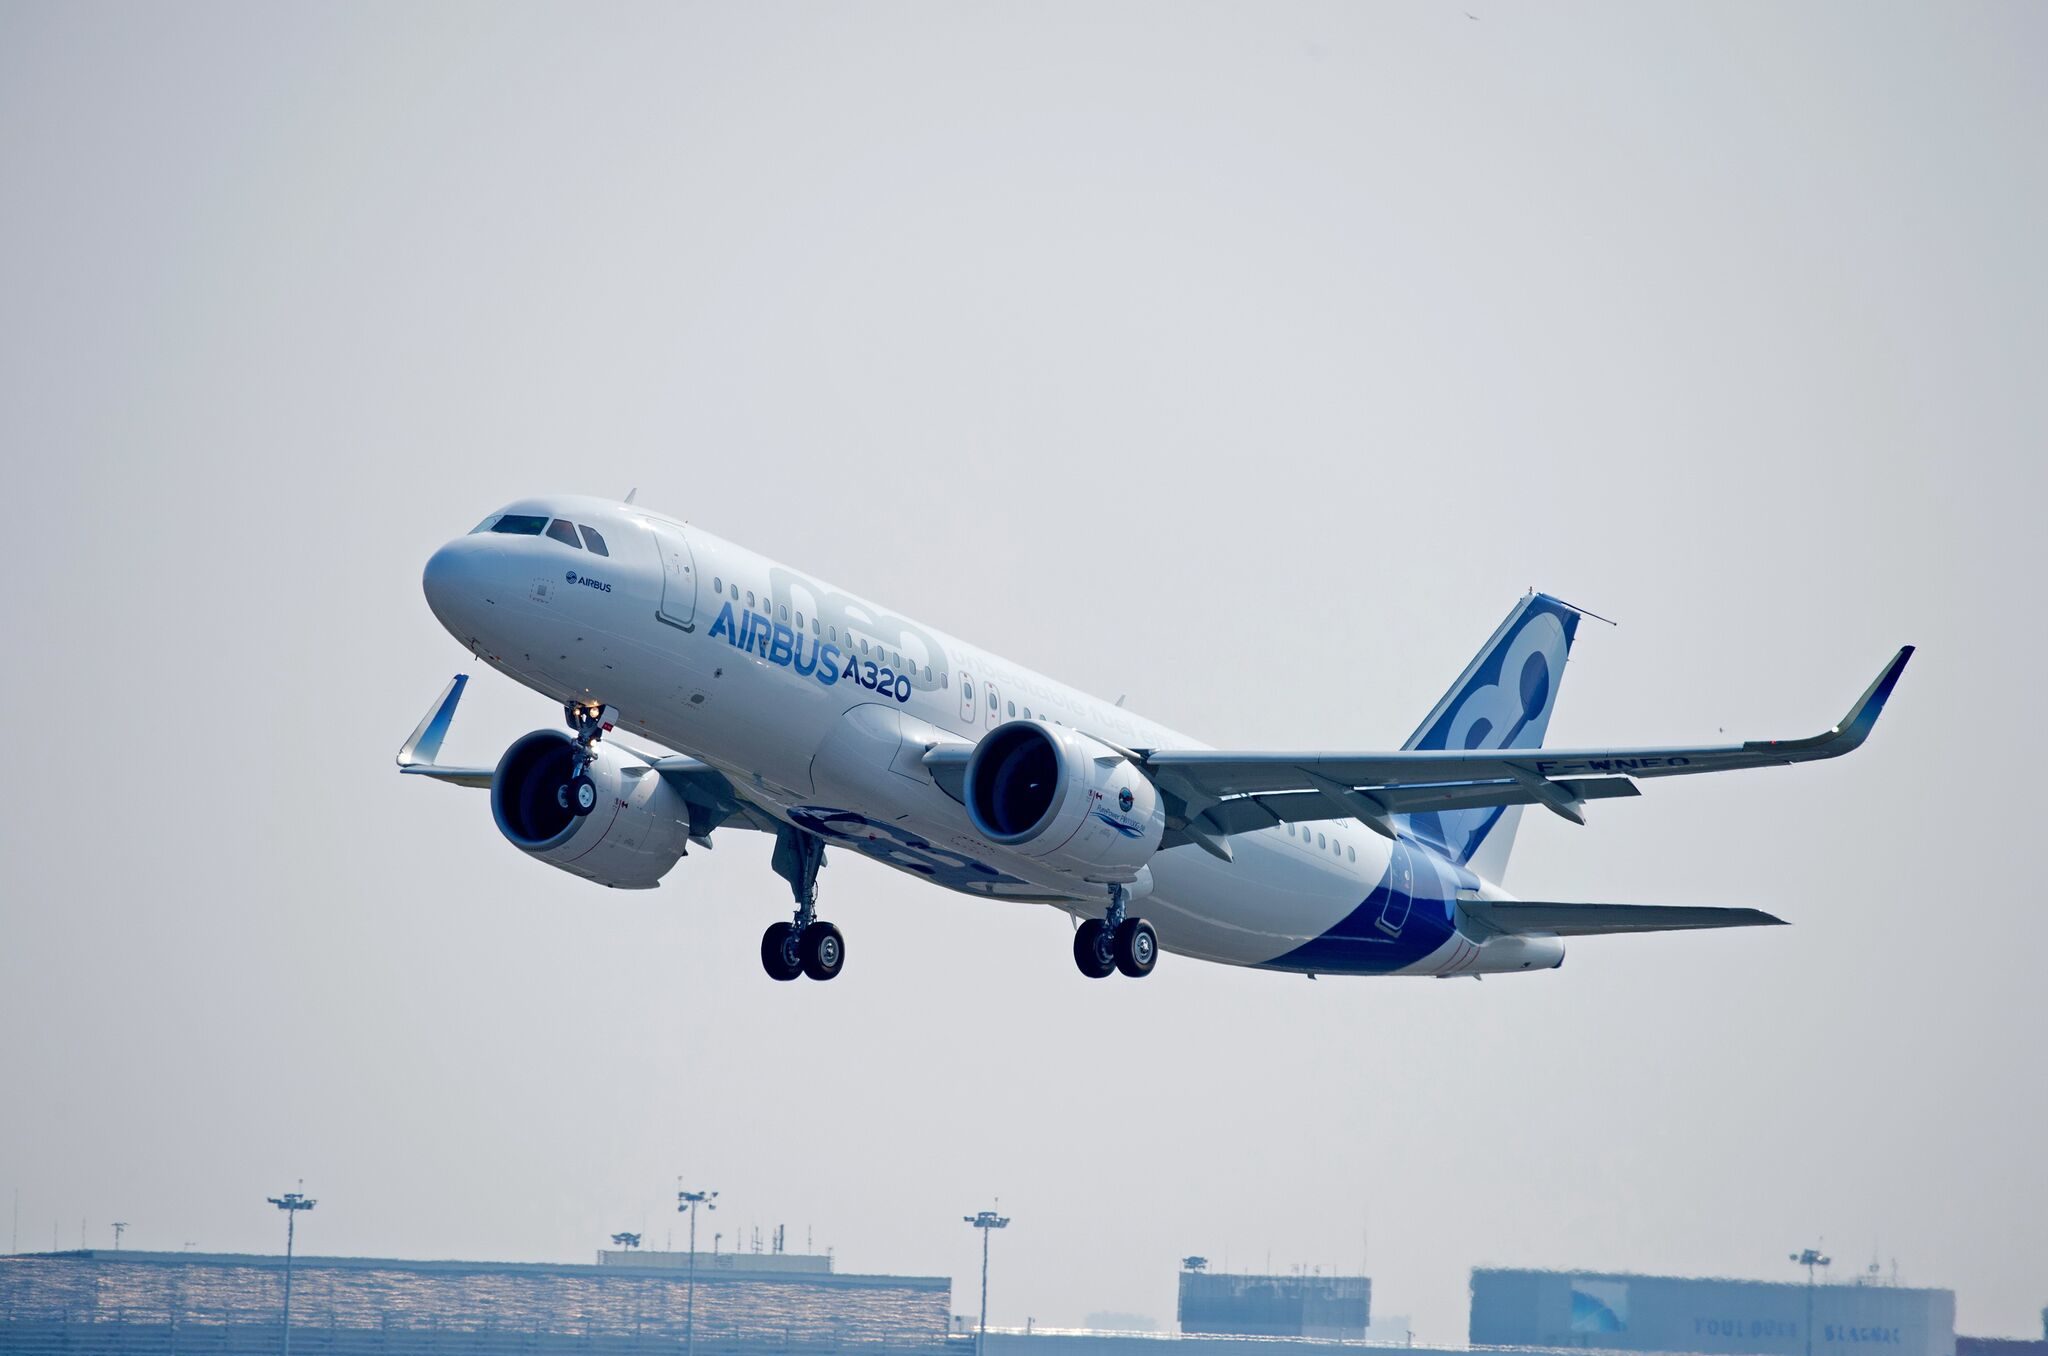 While Airbus already serves the U.S. market with the operation of an A320 assembly factory in Atlanta, it intends to open up a Bombardier assembly factory in the U.S. as well--in addition to the Mirabel, Que. facility that is already in operation. Photo courtesy of Airbus